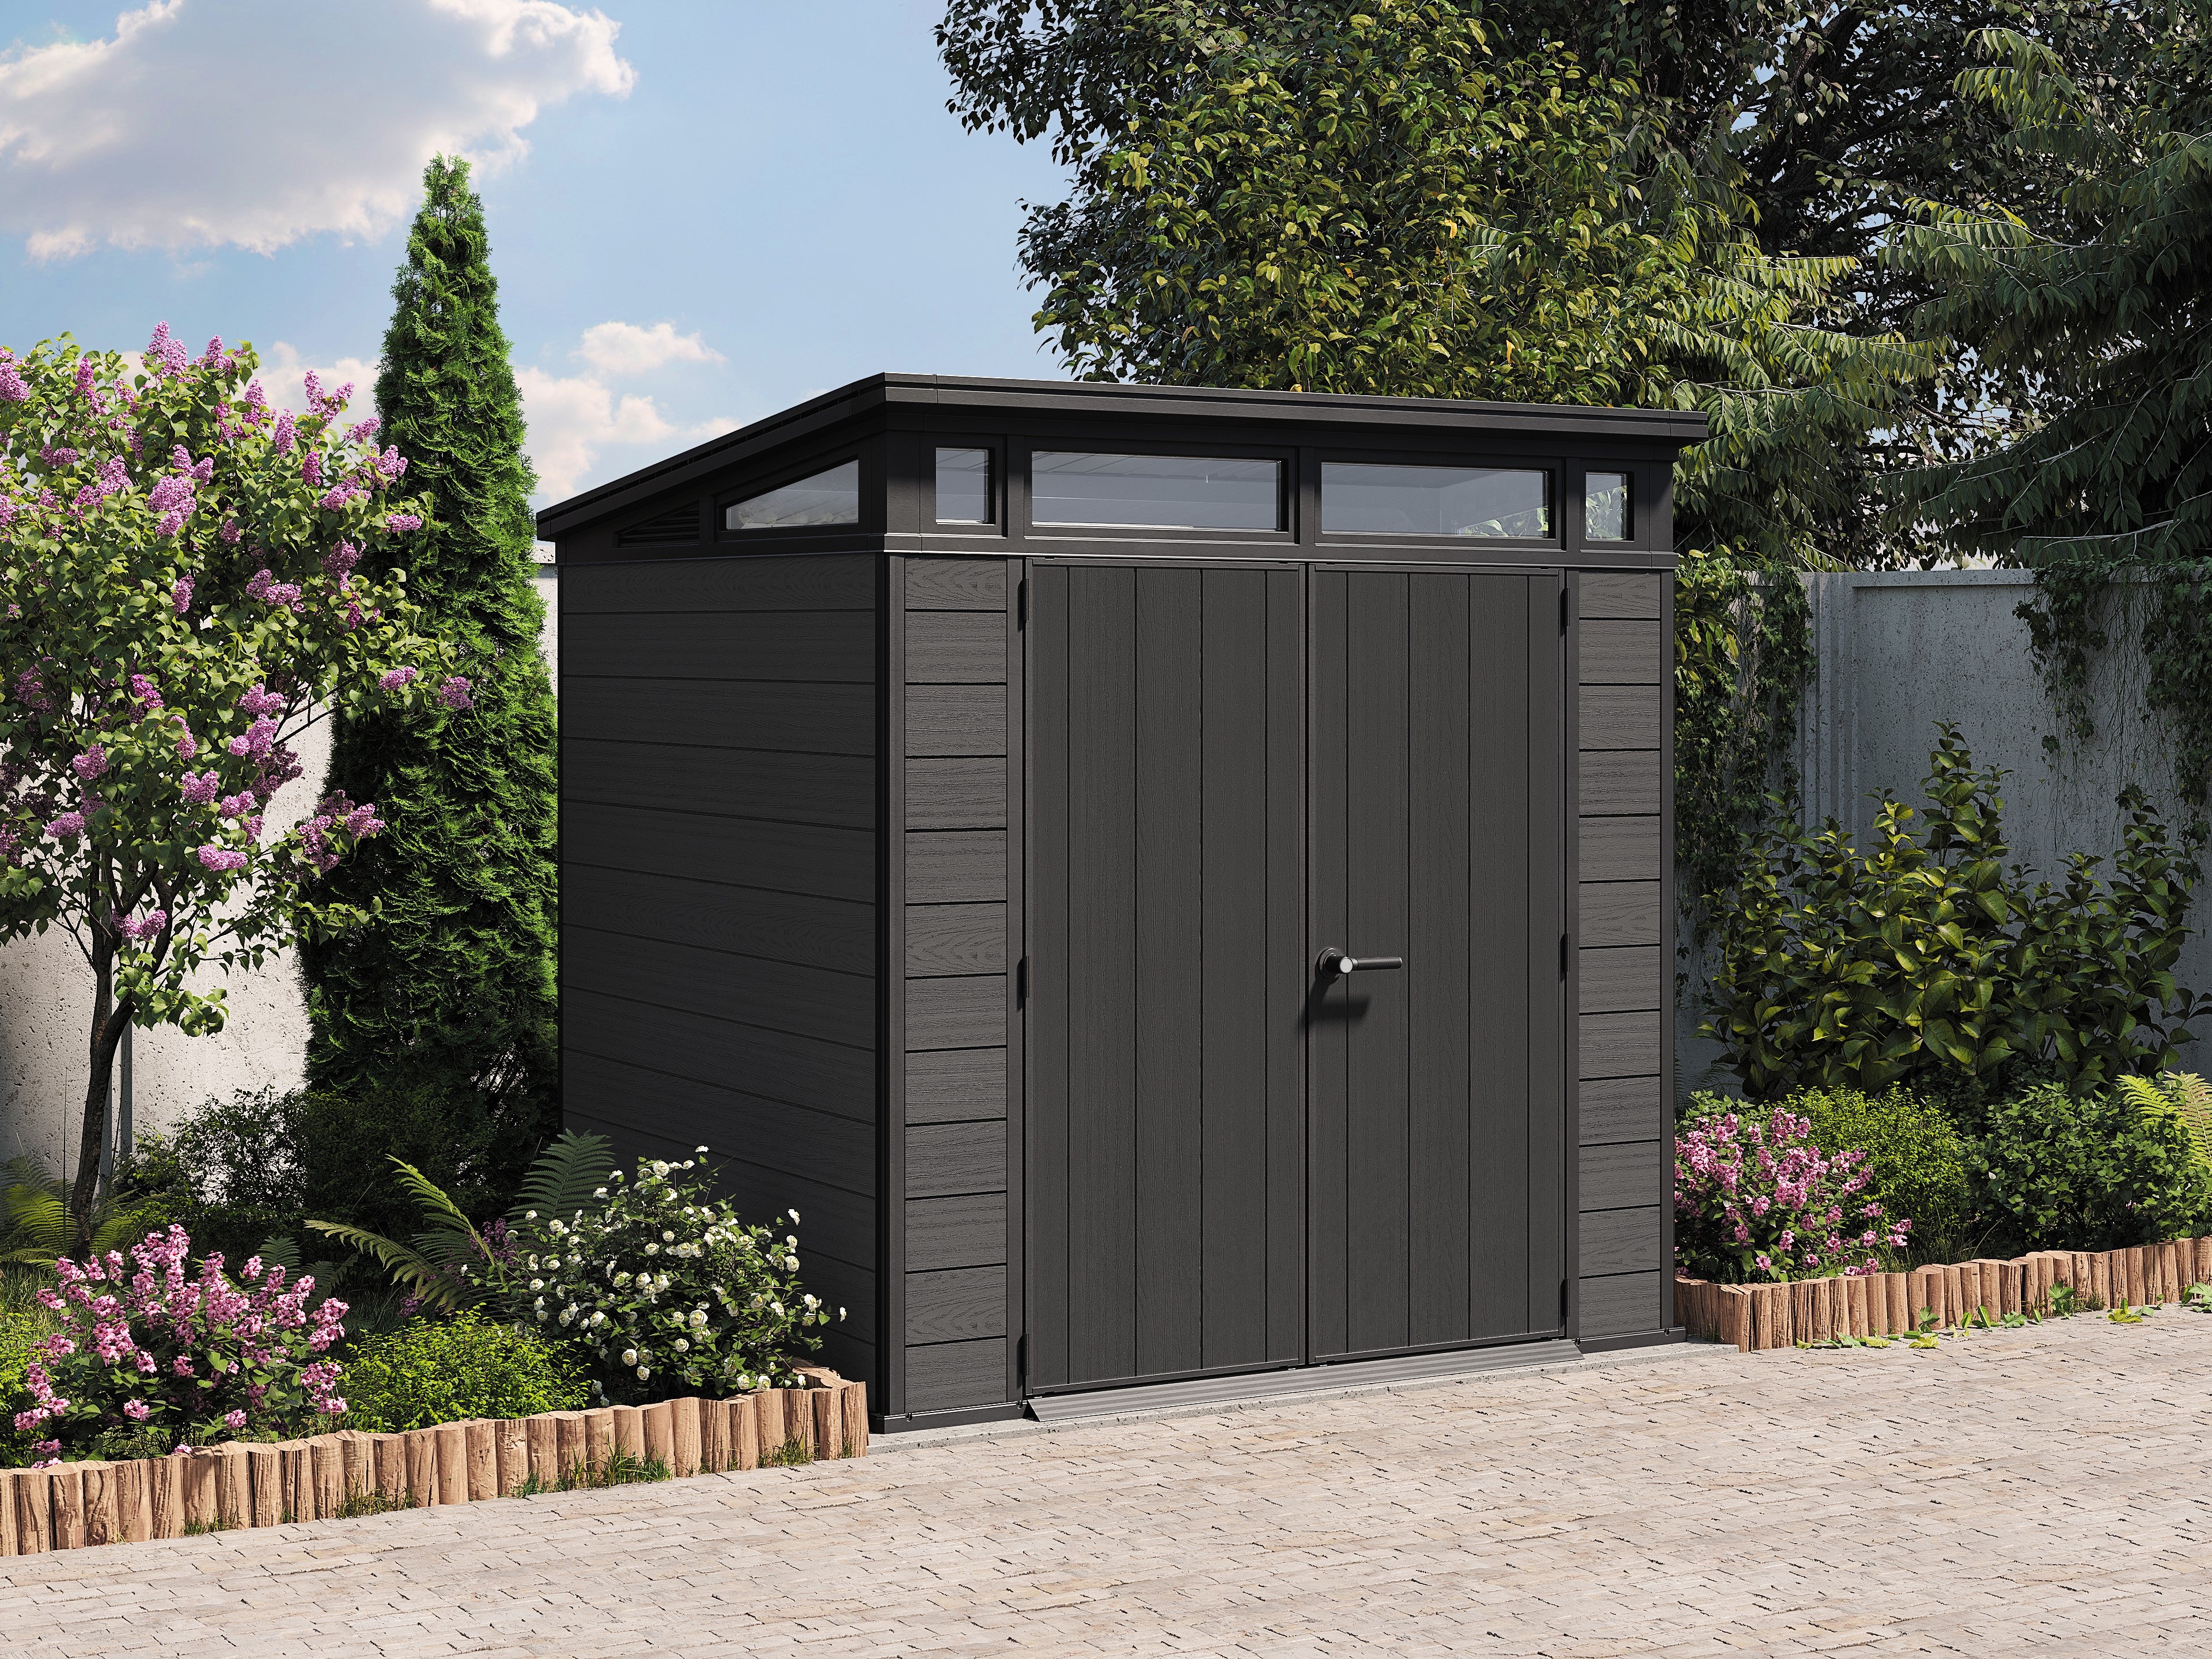 Keter_Cortina_Shed_on_a_driveway